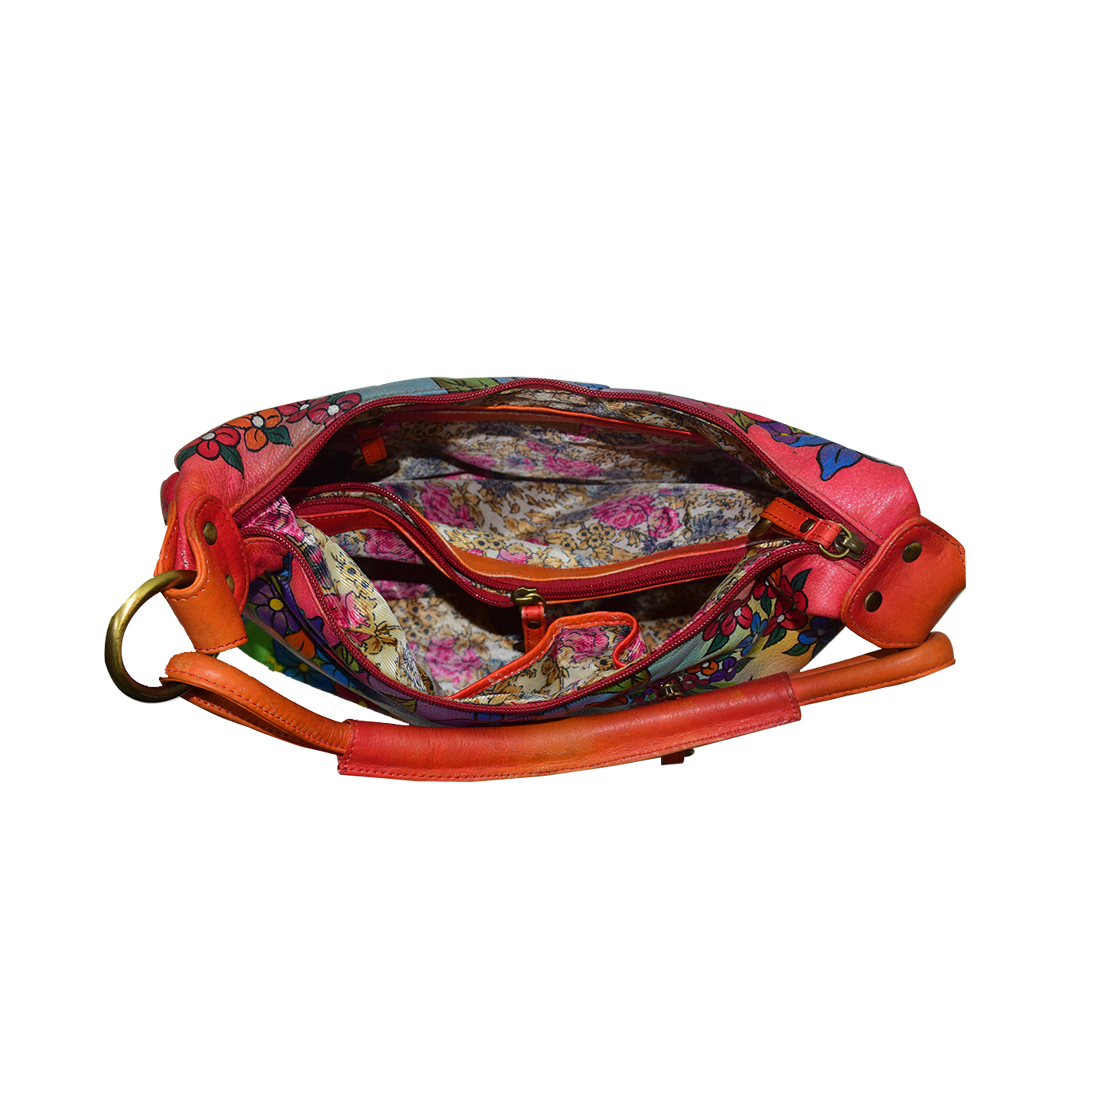 Hand Painted Colorful Leather Shoulder Bag